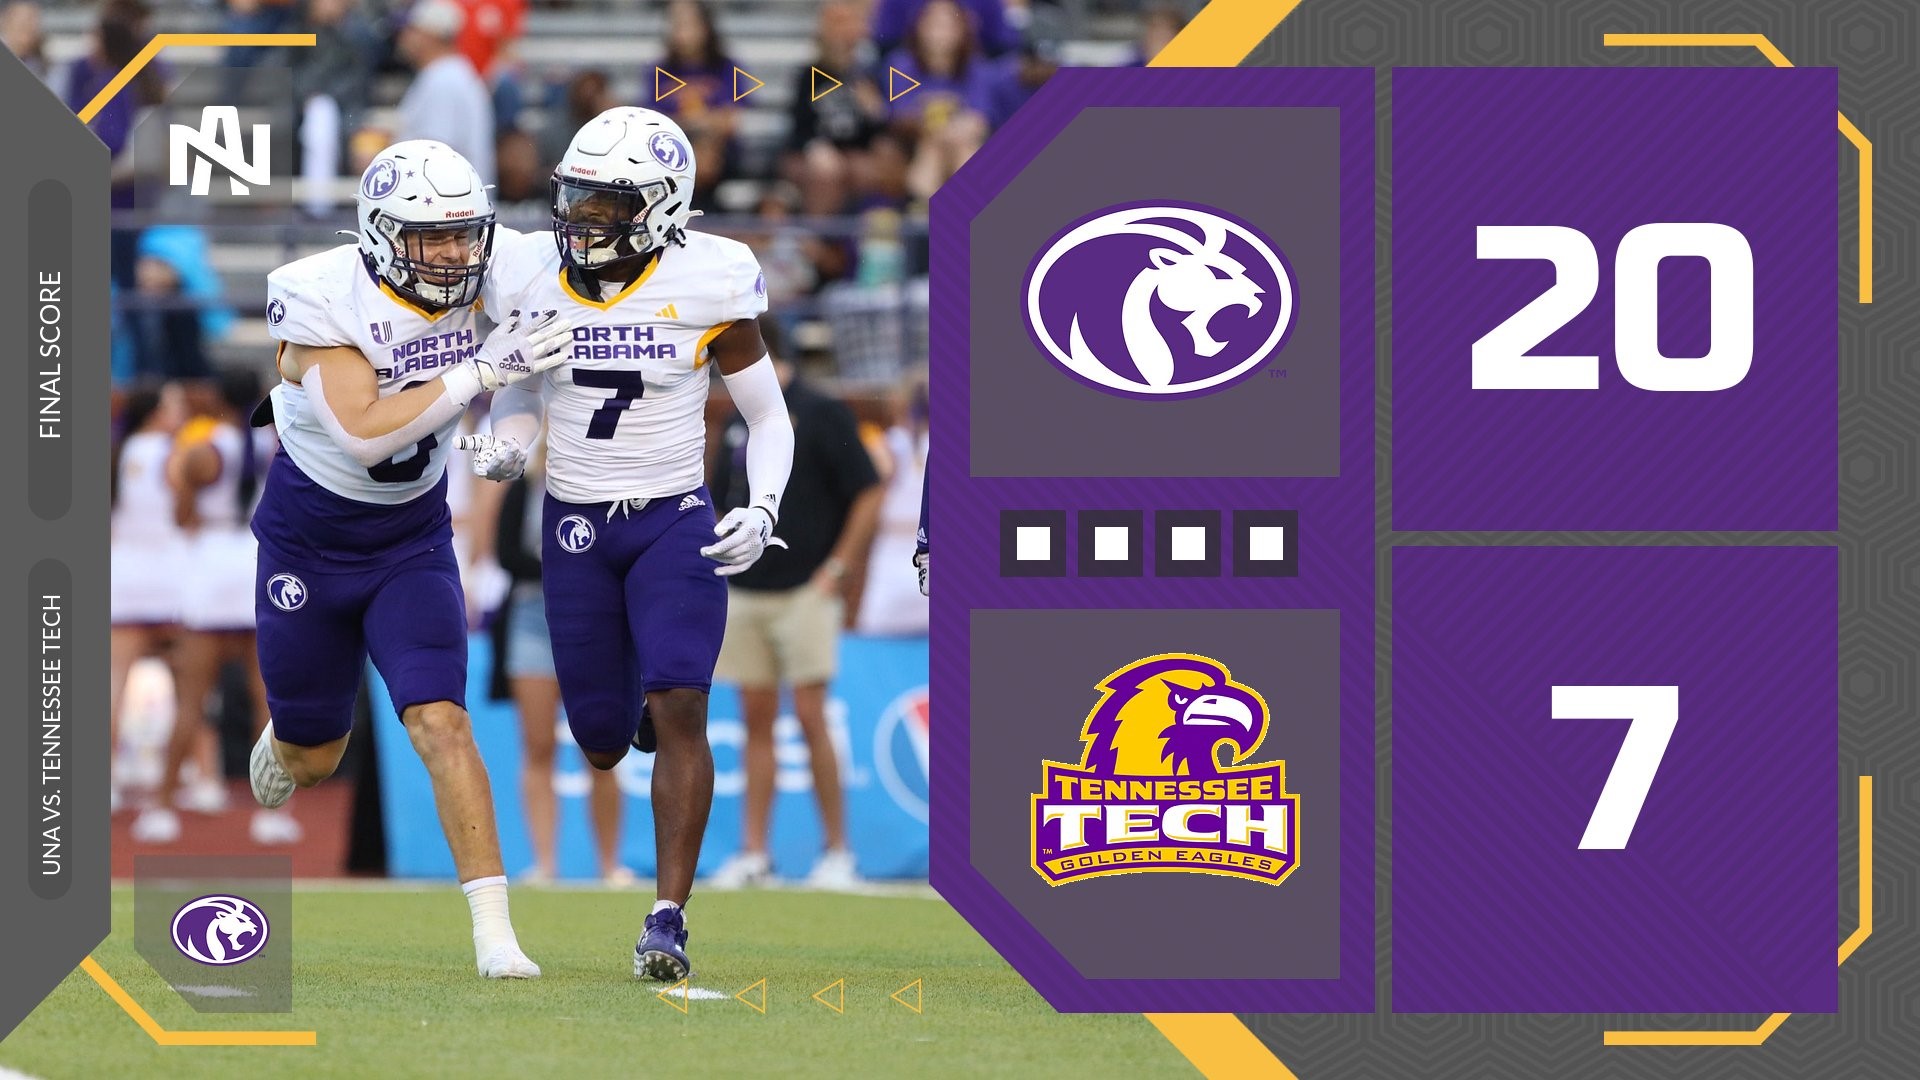 Brent Dearmon and the UNA Lions improved to 2-2 on the season with 20-7 win over Tennessee Tech.